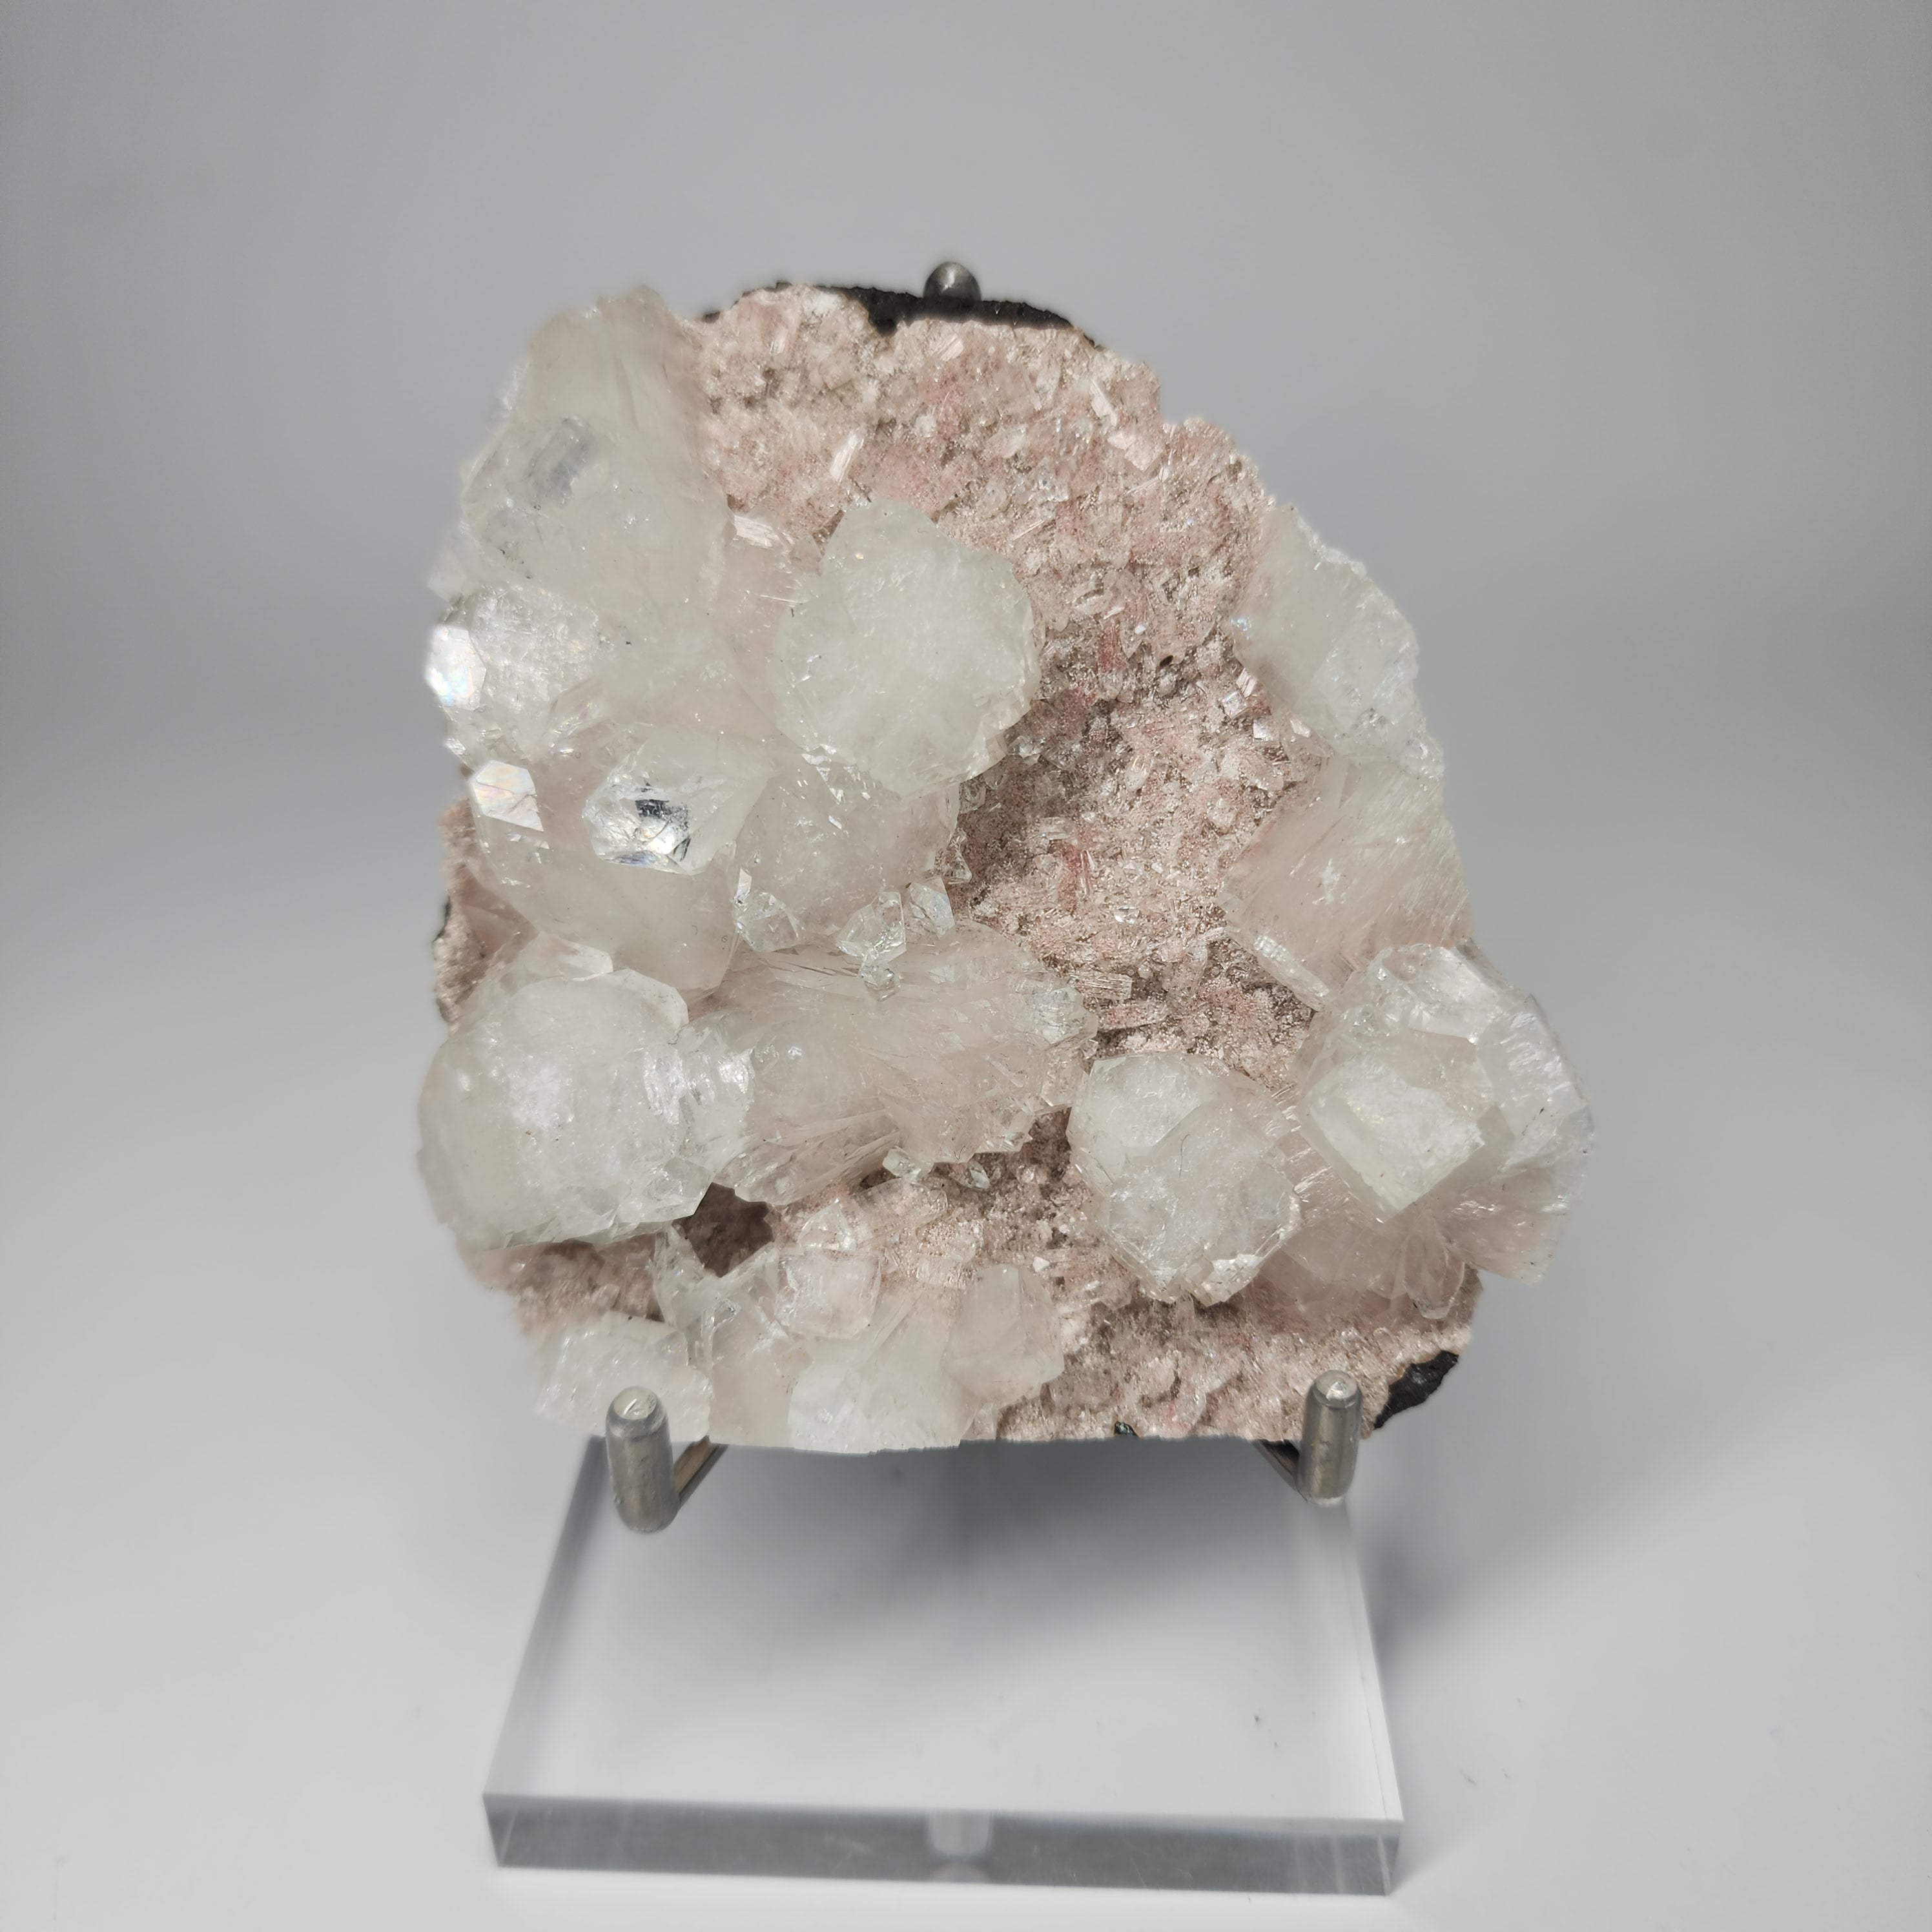 Pink Chalcedony with Disco Ball Formation Apophyllite - Specimen #8 - from Pune District, Maharashtra, India